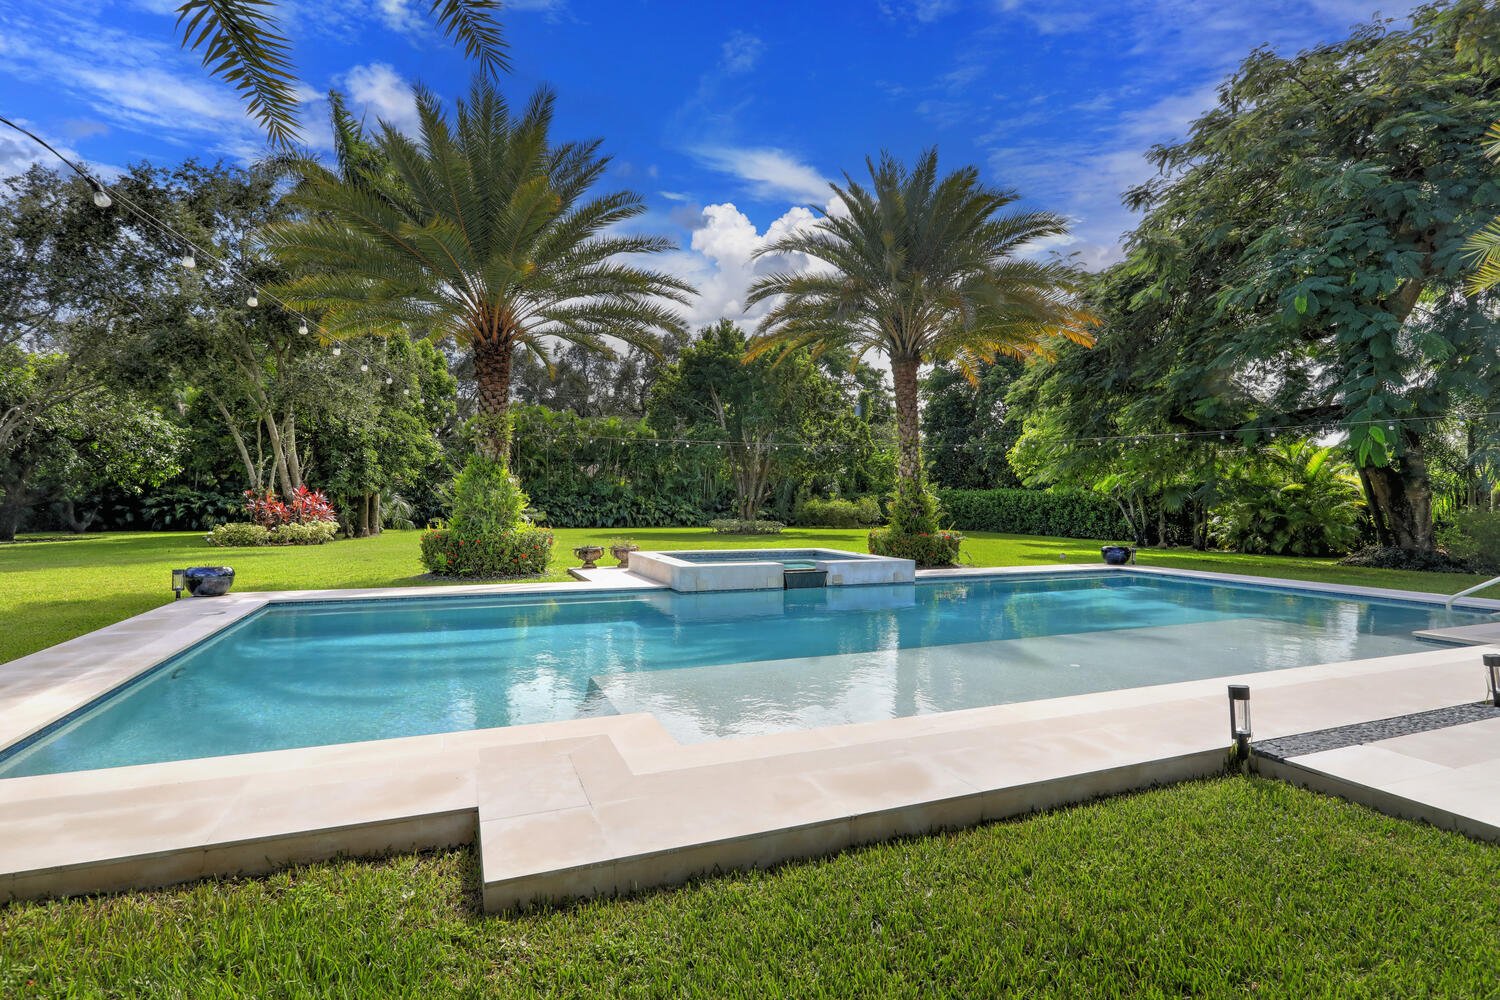 Master Brokers Forum Listing: Check Out This 'Hamptons Meets Key West' Style North Pinecrest Home Asking $5.8 Million 13.jpg